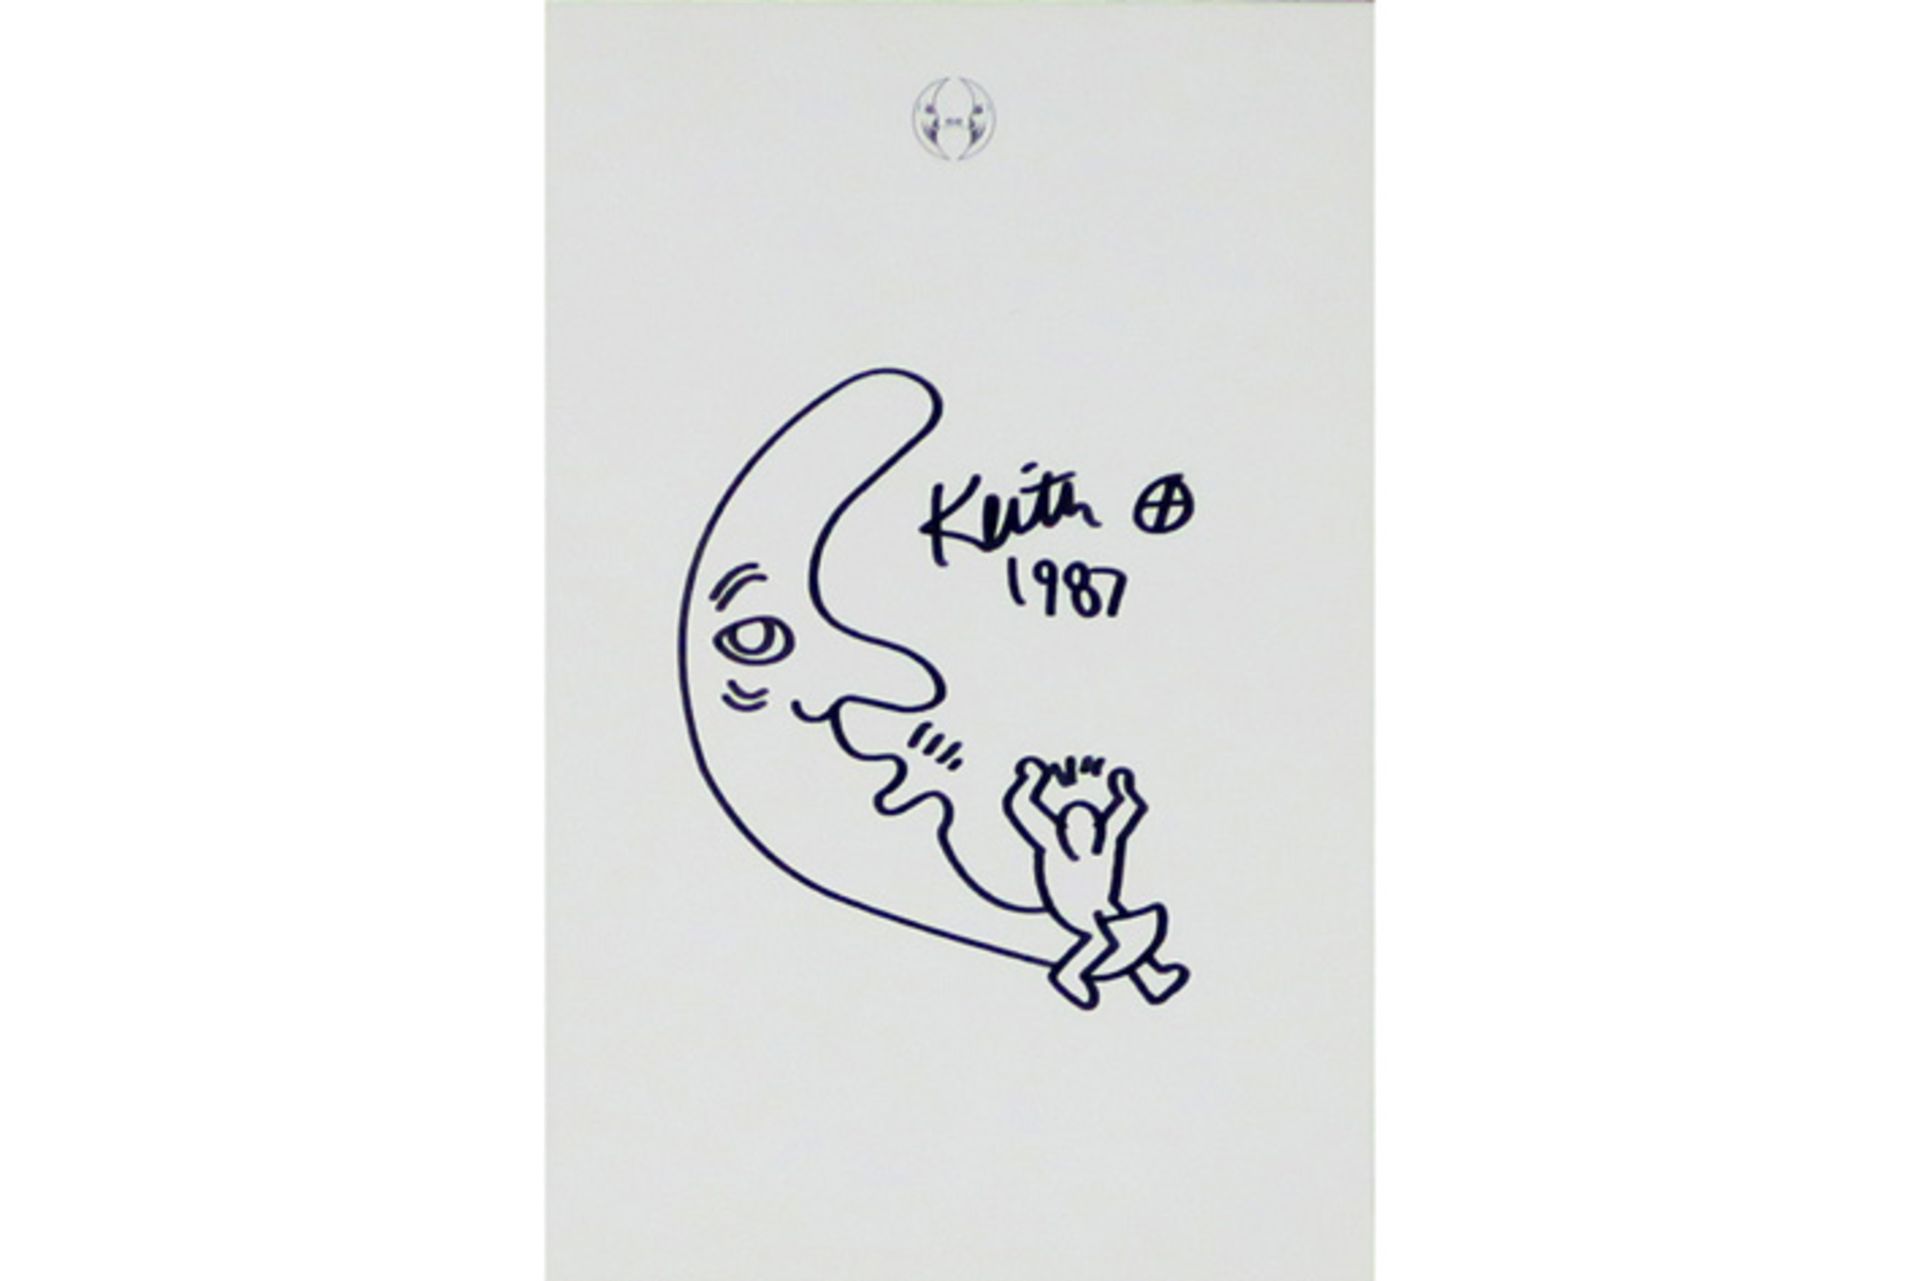 Keith Haring signed drawing made for the project 'Luna Luna' - signed and dated 1987 sold with a "